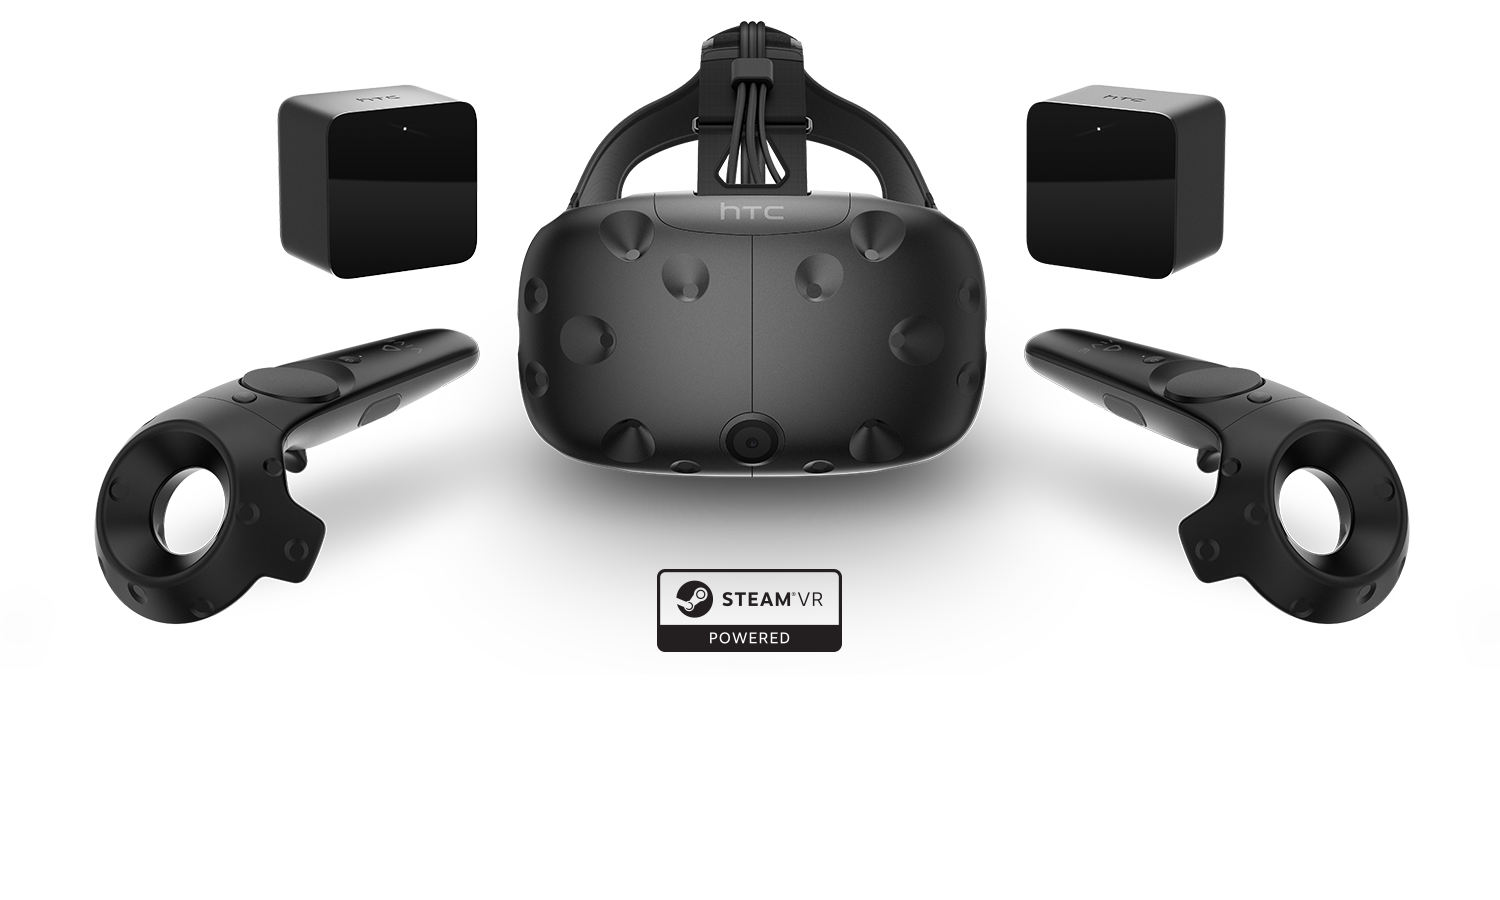 Media asset in full size related to 3dfxzone.it news item entitled as follows: I game per Oculus Rift giocabili anche con HTC Vive? Si, ma per poco | Image Name: news24125_HTC_Vive_1.png